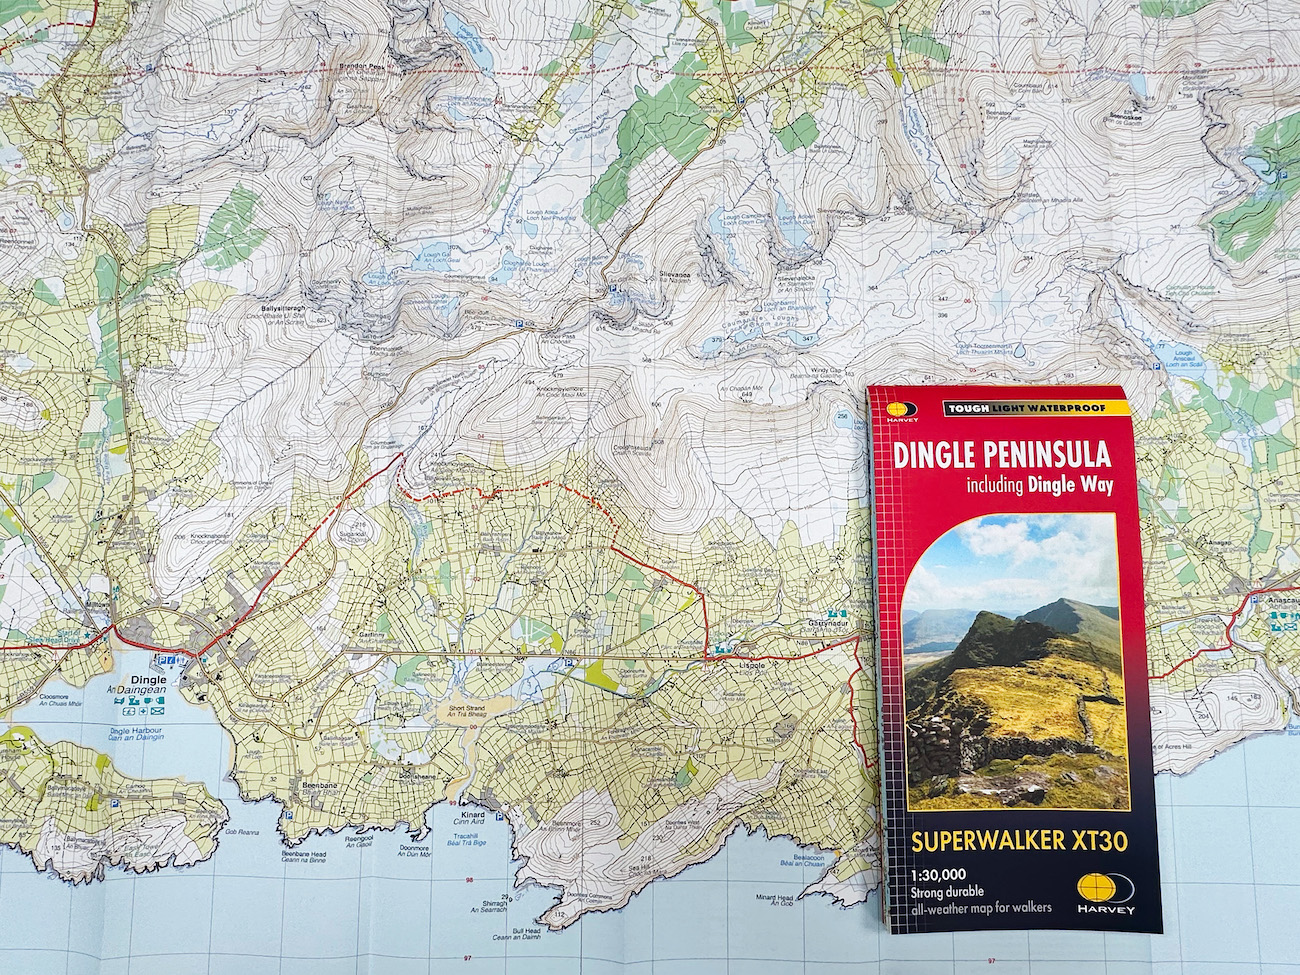 HARVEY Maps has made a map for the Dingle Peninsula in Ireland